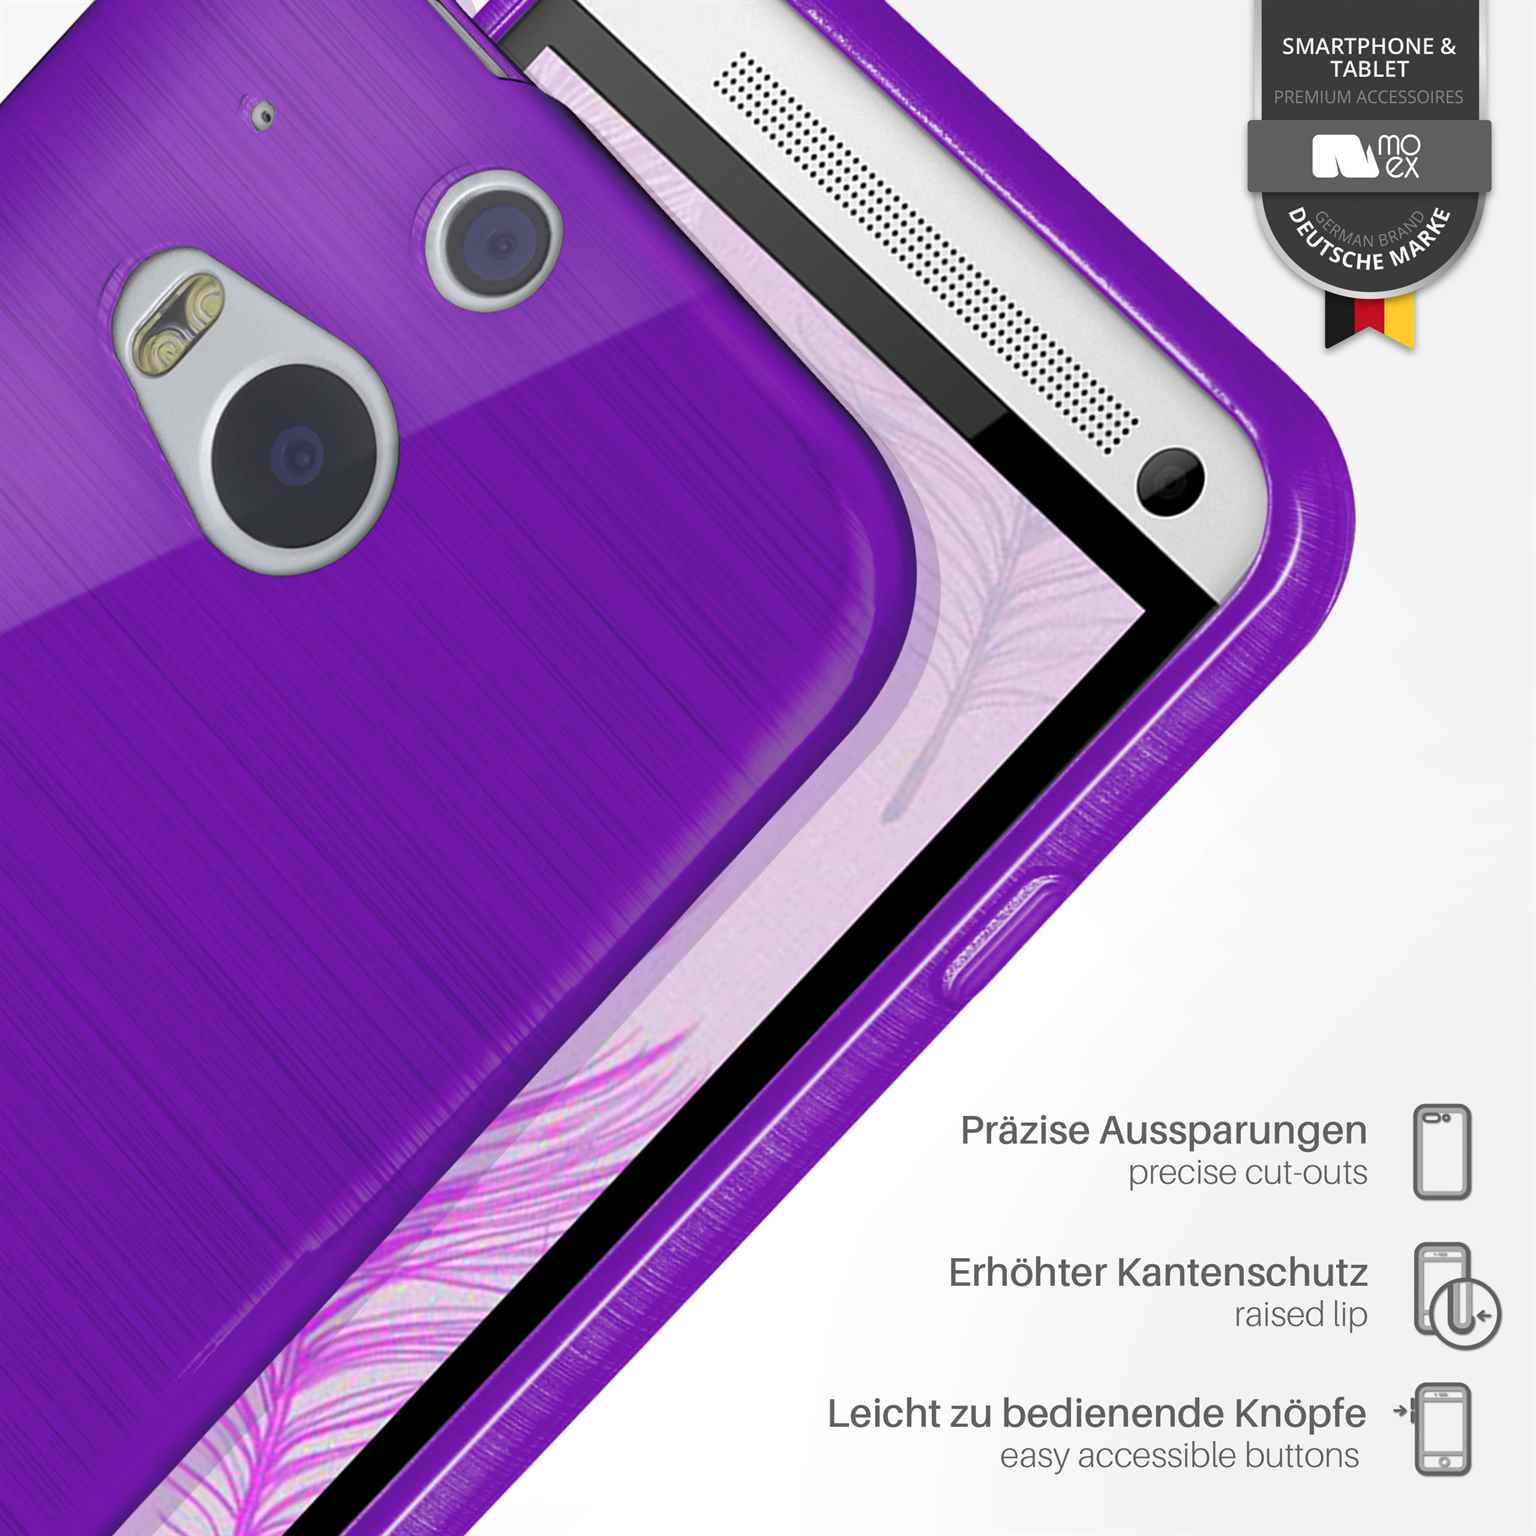 Case, Brushed Backcover, One HTC, Purpure-Purple M8s, MOEX